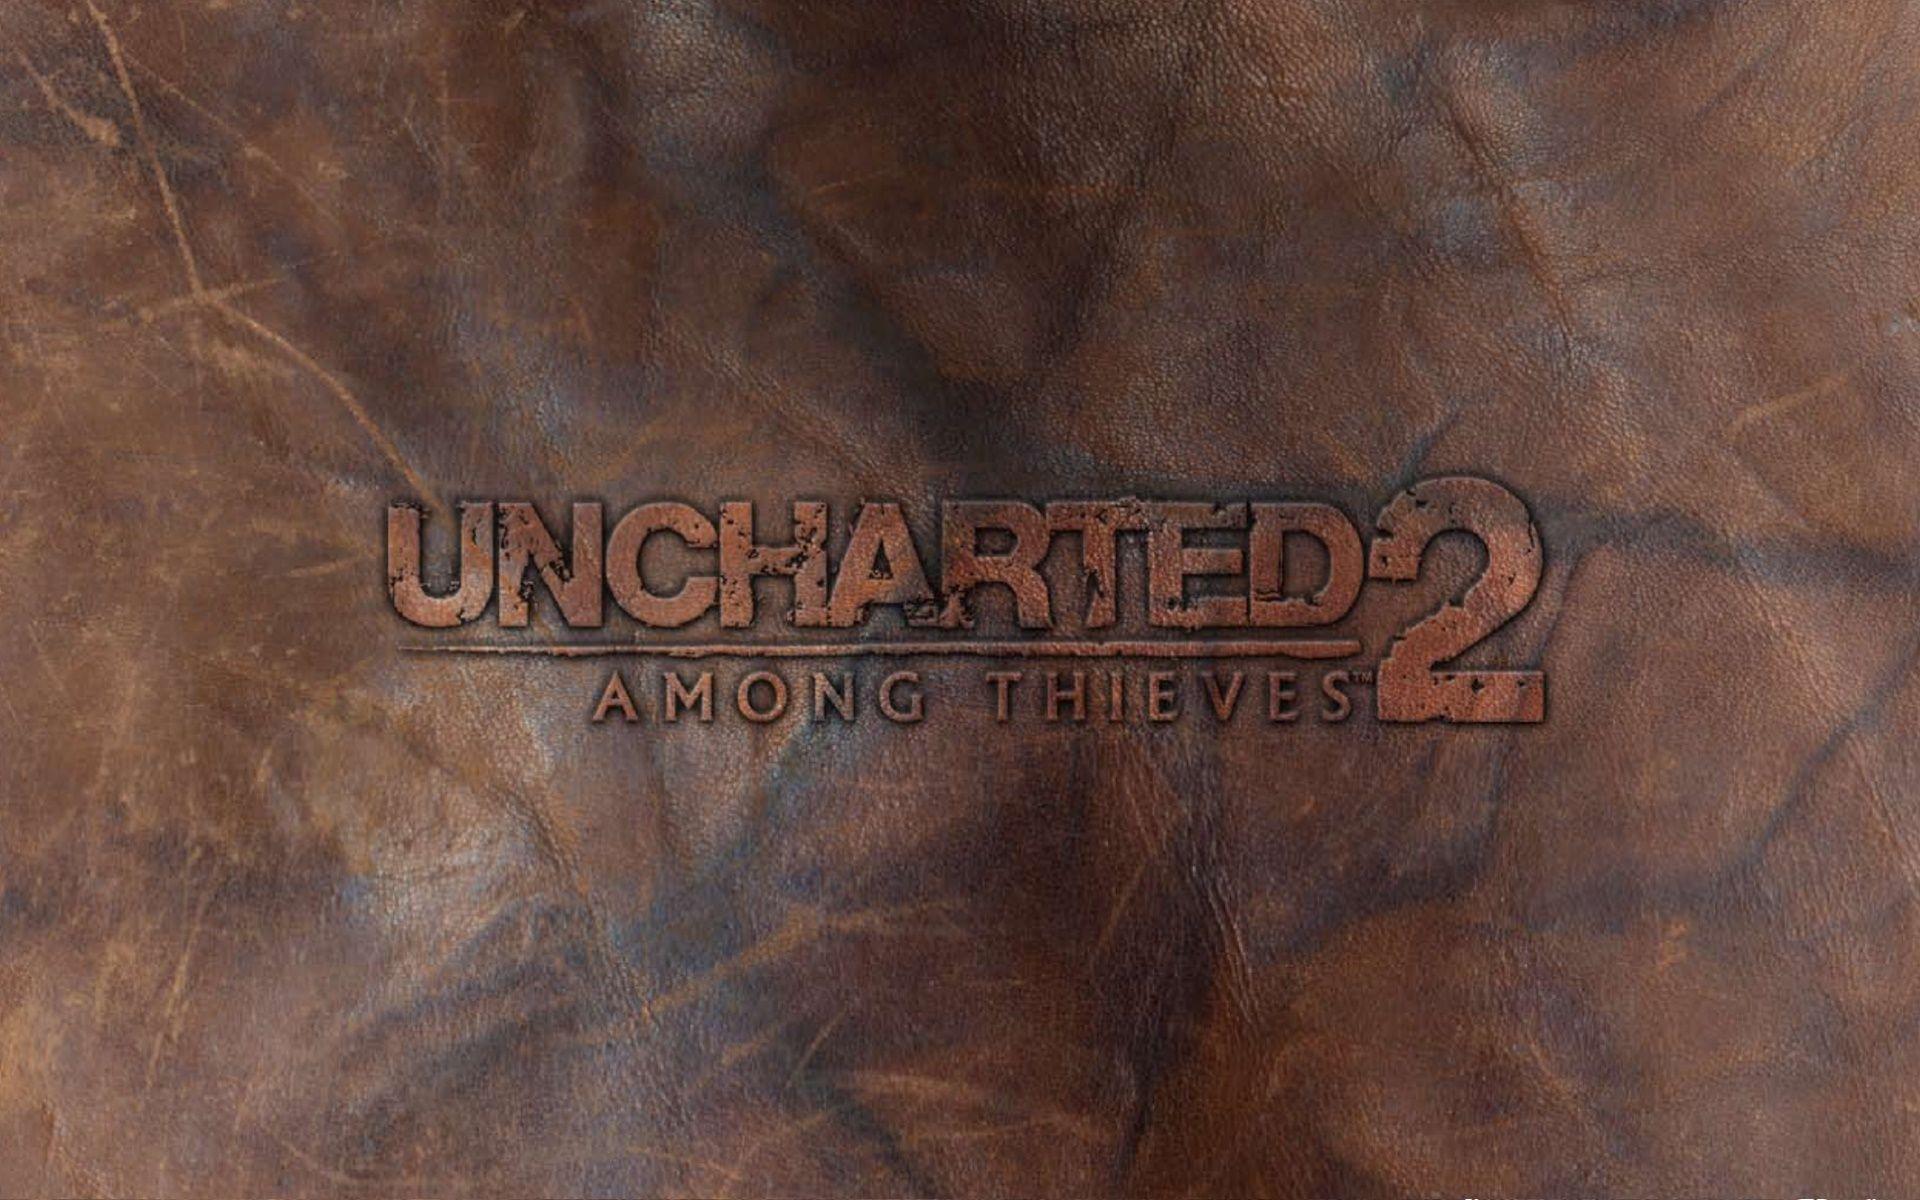 Uncharted 2 Among Thieves Wallpaper, Uncharted 2 Among Thieves, Game